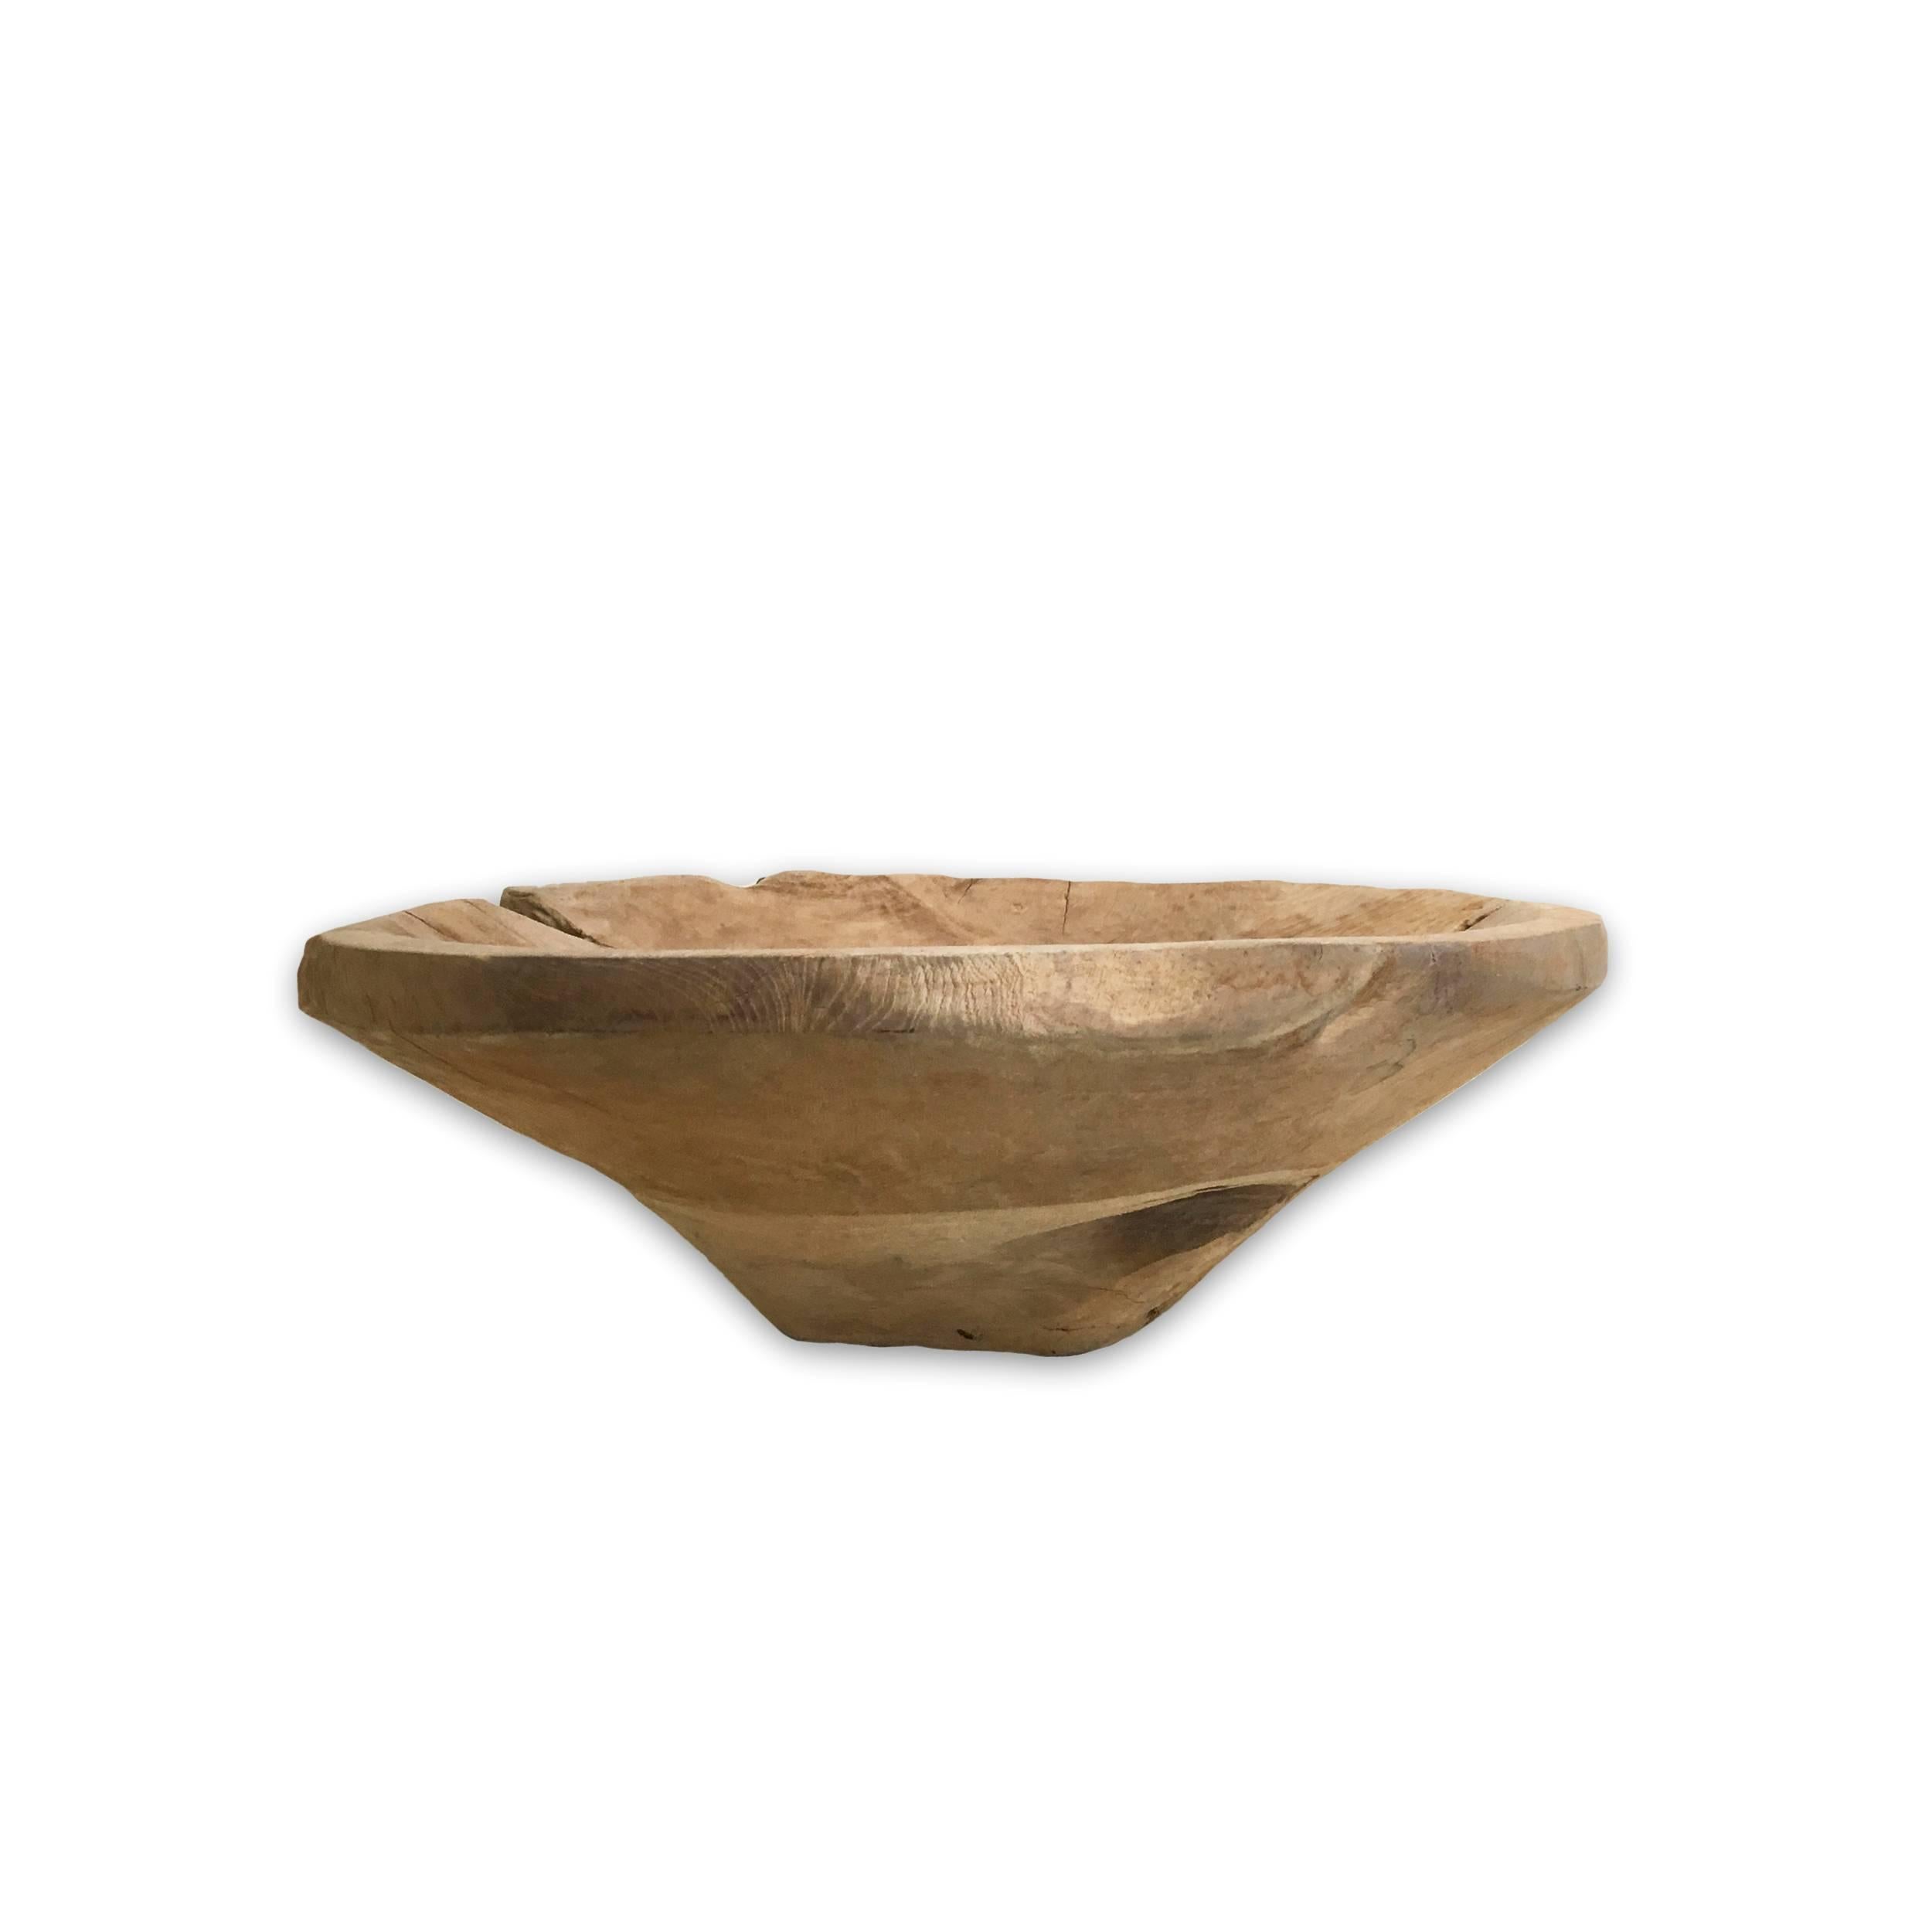 WEATHERED TEAK RUSTIC CARVED BOWL - Art by Unknown